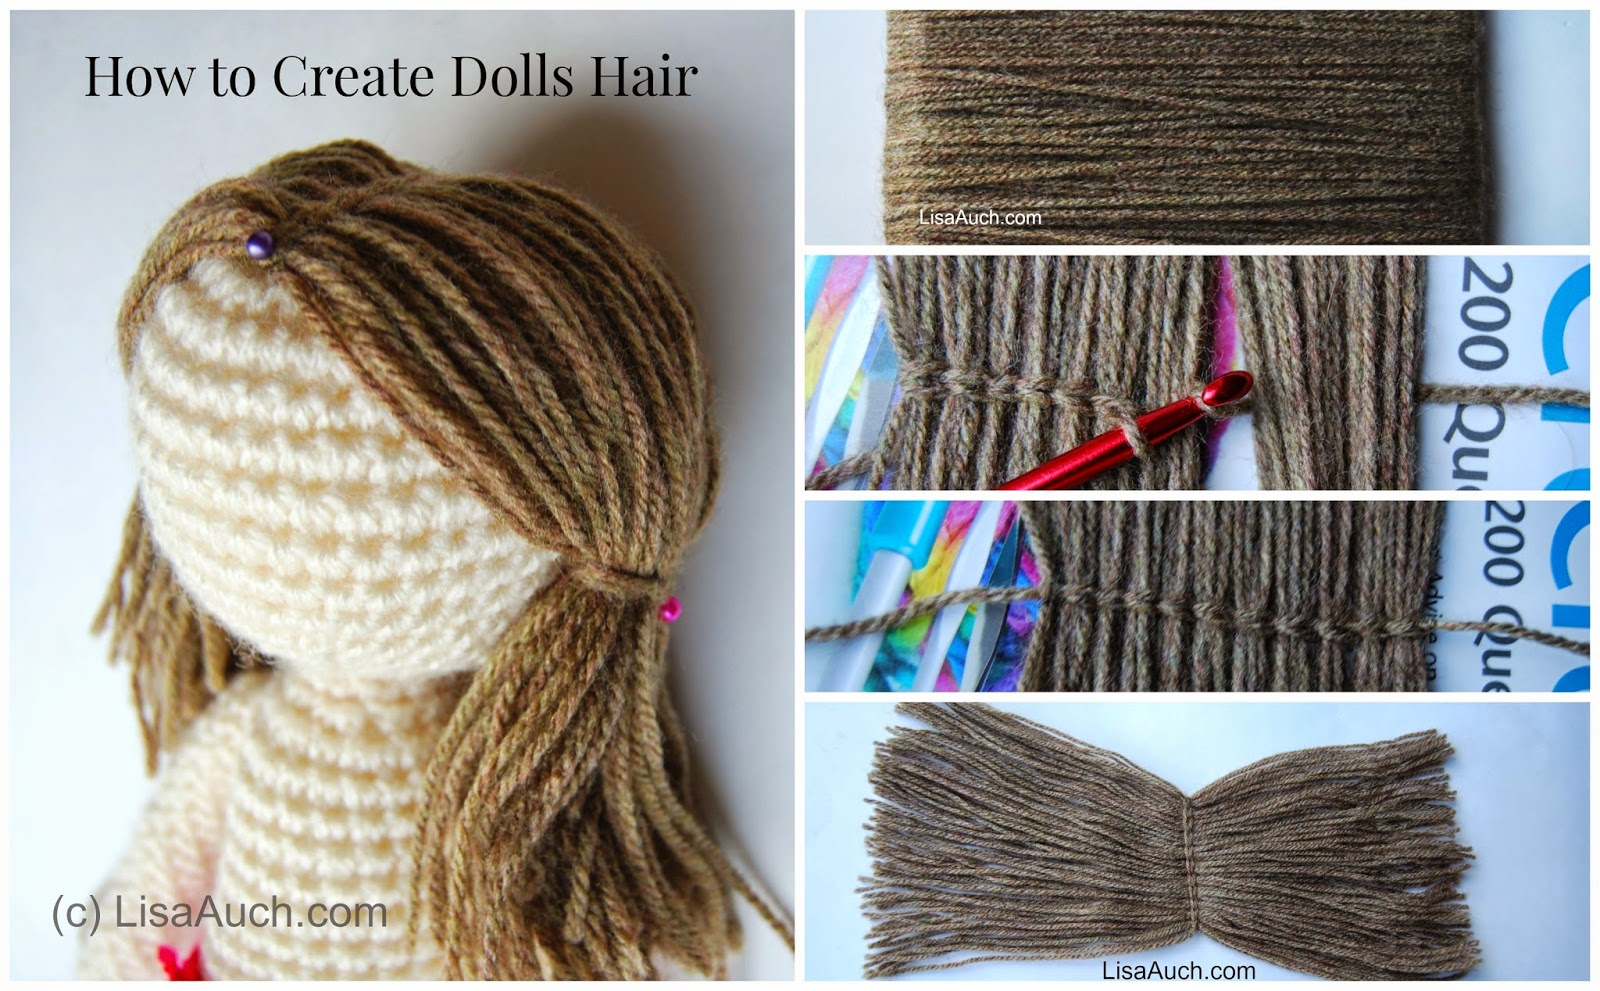 Crochet Hair Patterns Free Crochet Patterns And Designs Lisaauch How To Crochet Dolls